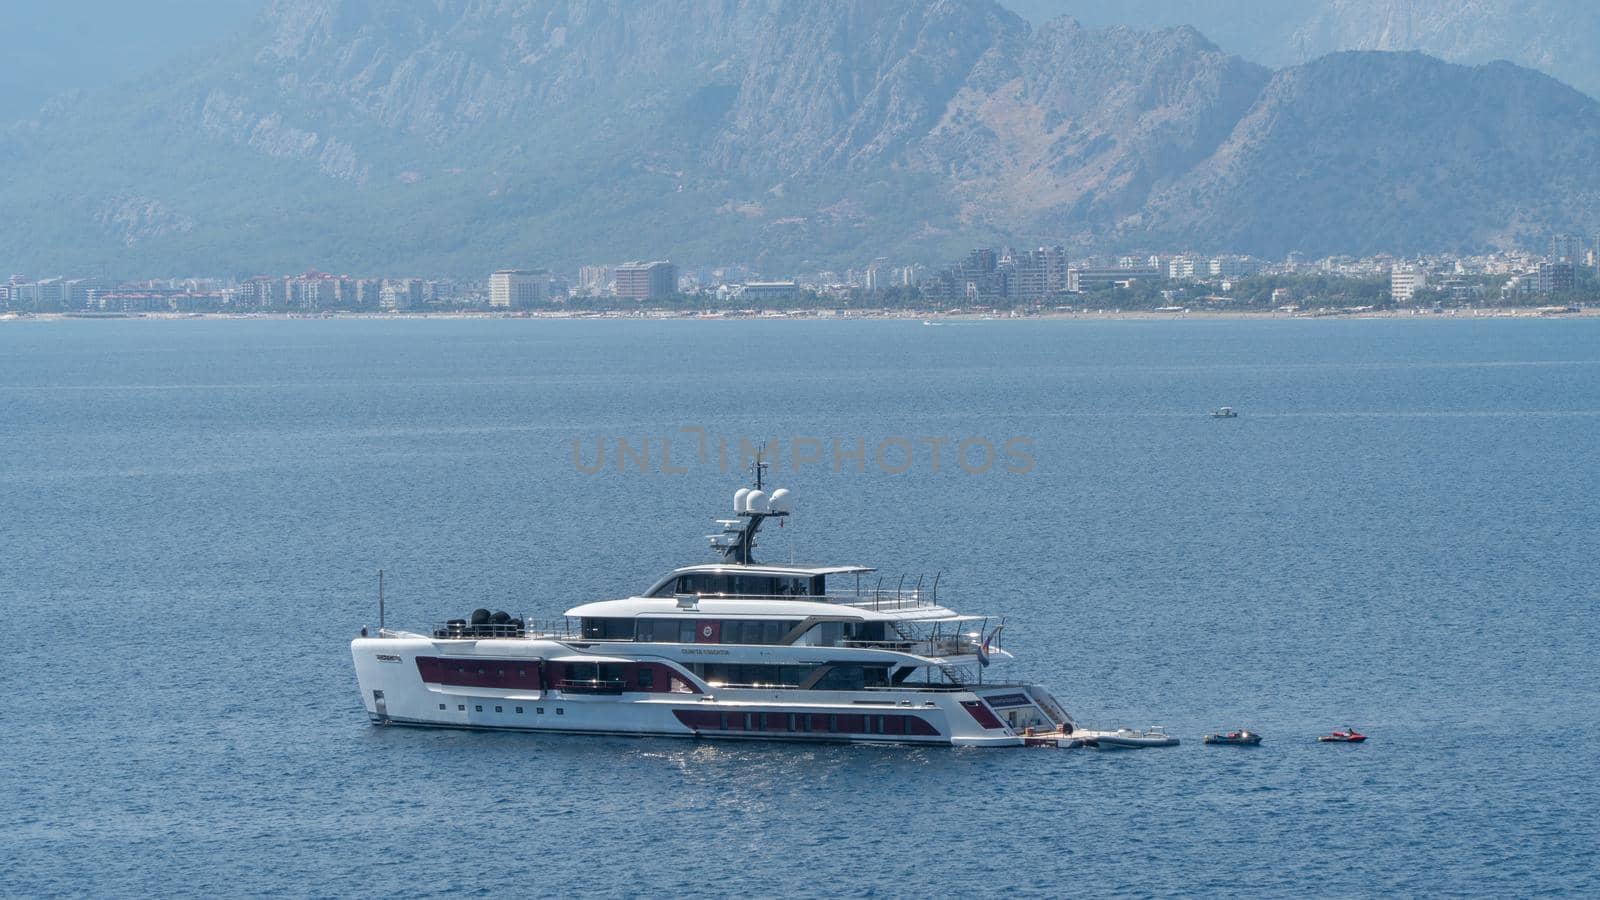 Yacht in the sea against the backdrop of mountains and the city by voktybre